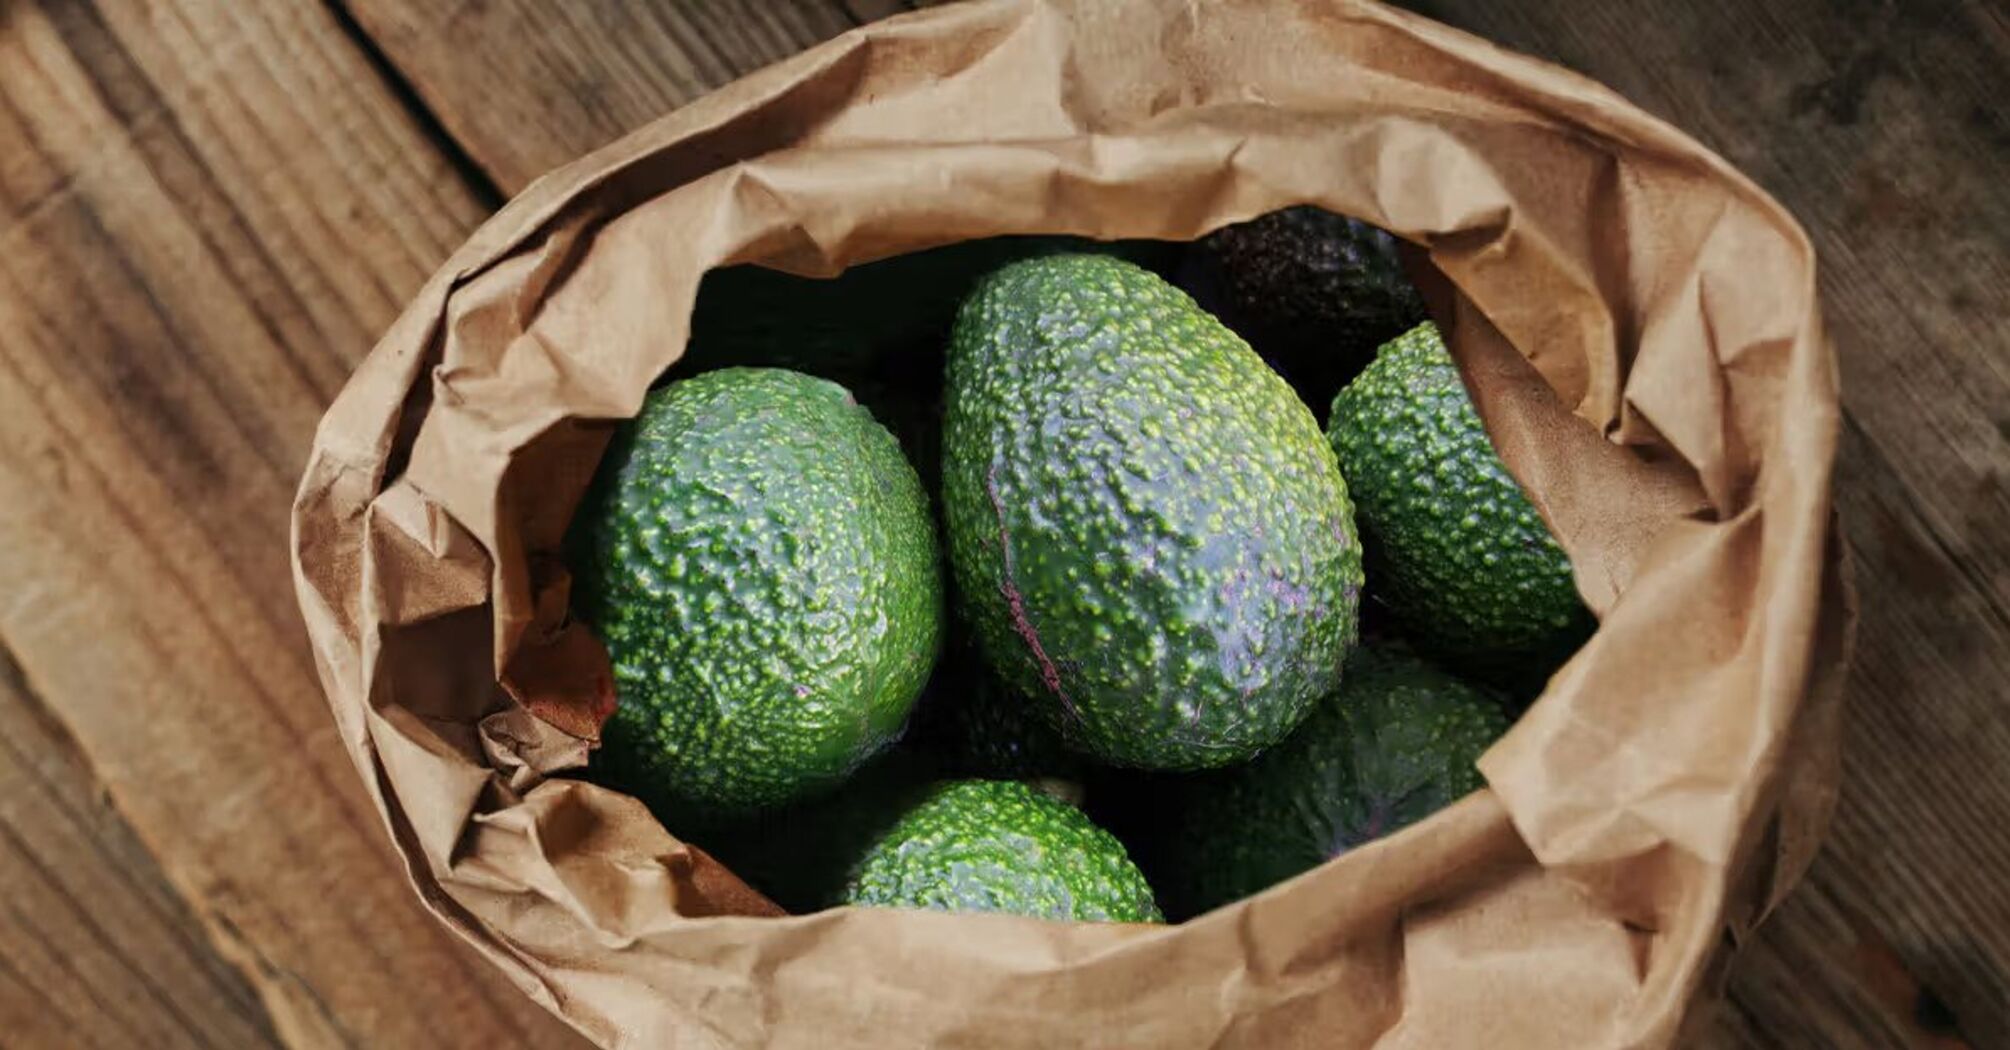 How to make avocados ripe at home